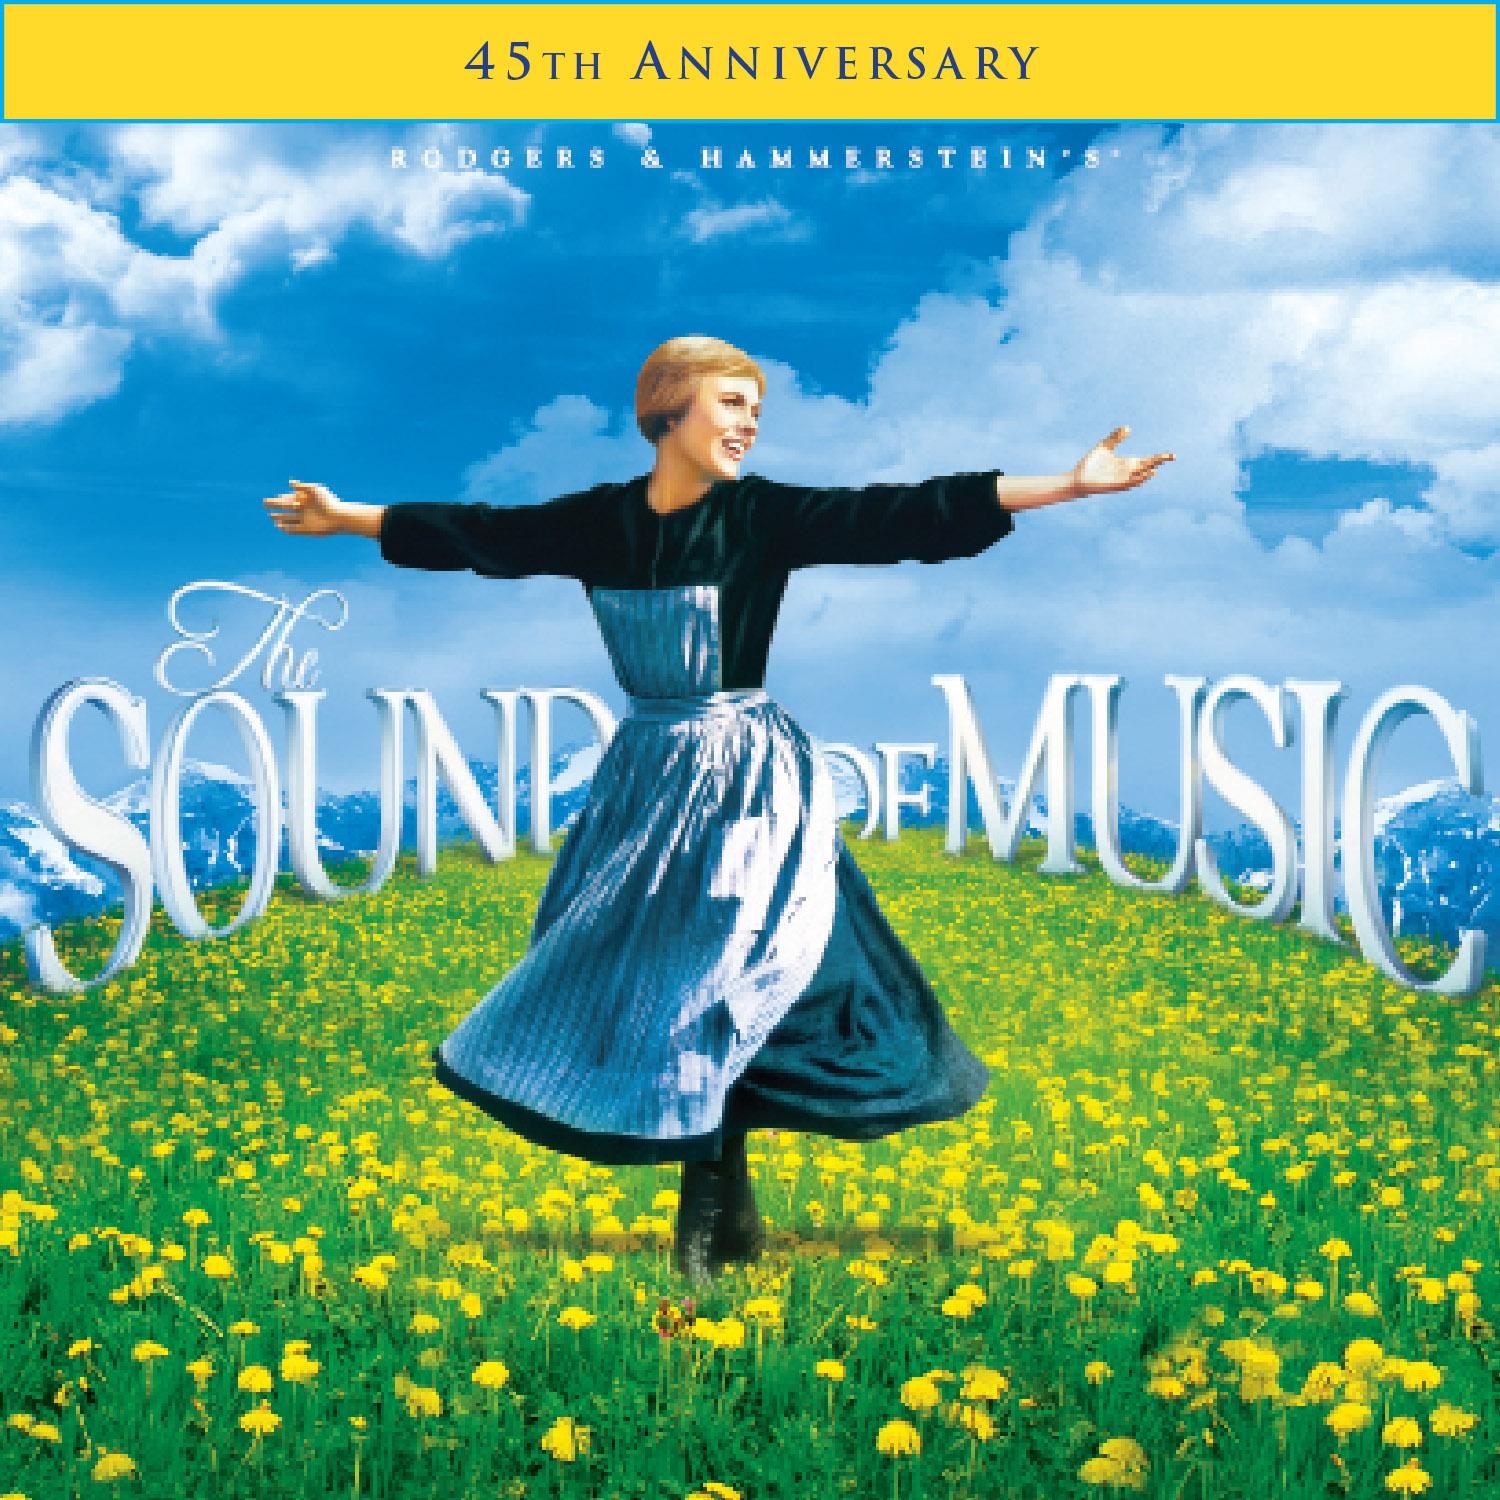 The Sound of Music Theme Song. Movie Theme Songs & TV Soundtracks